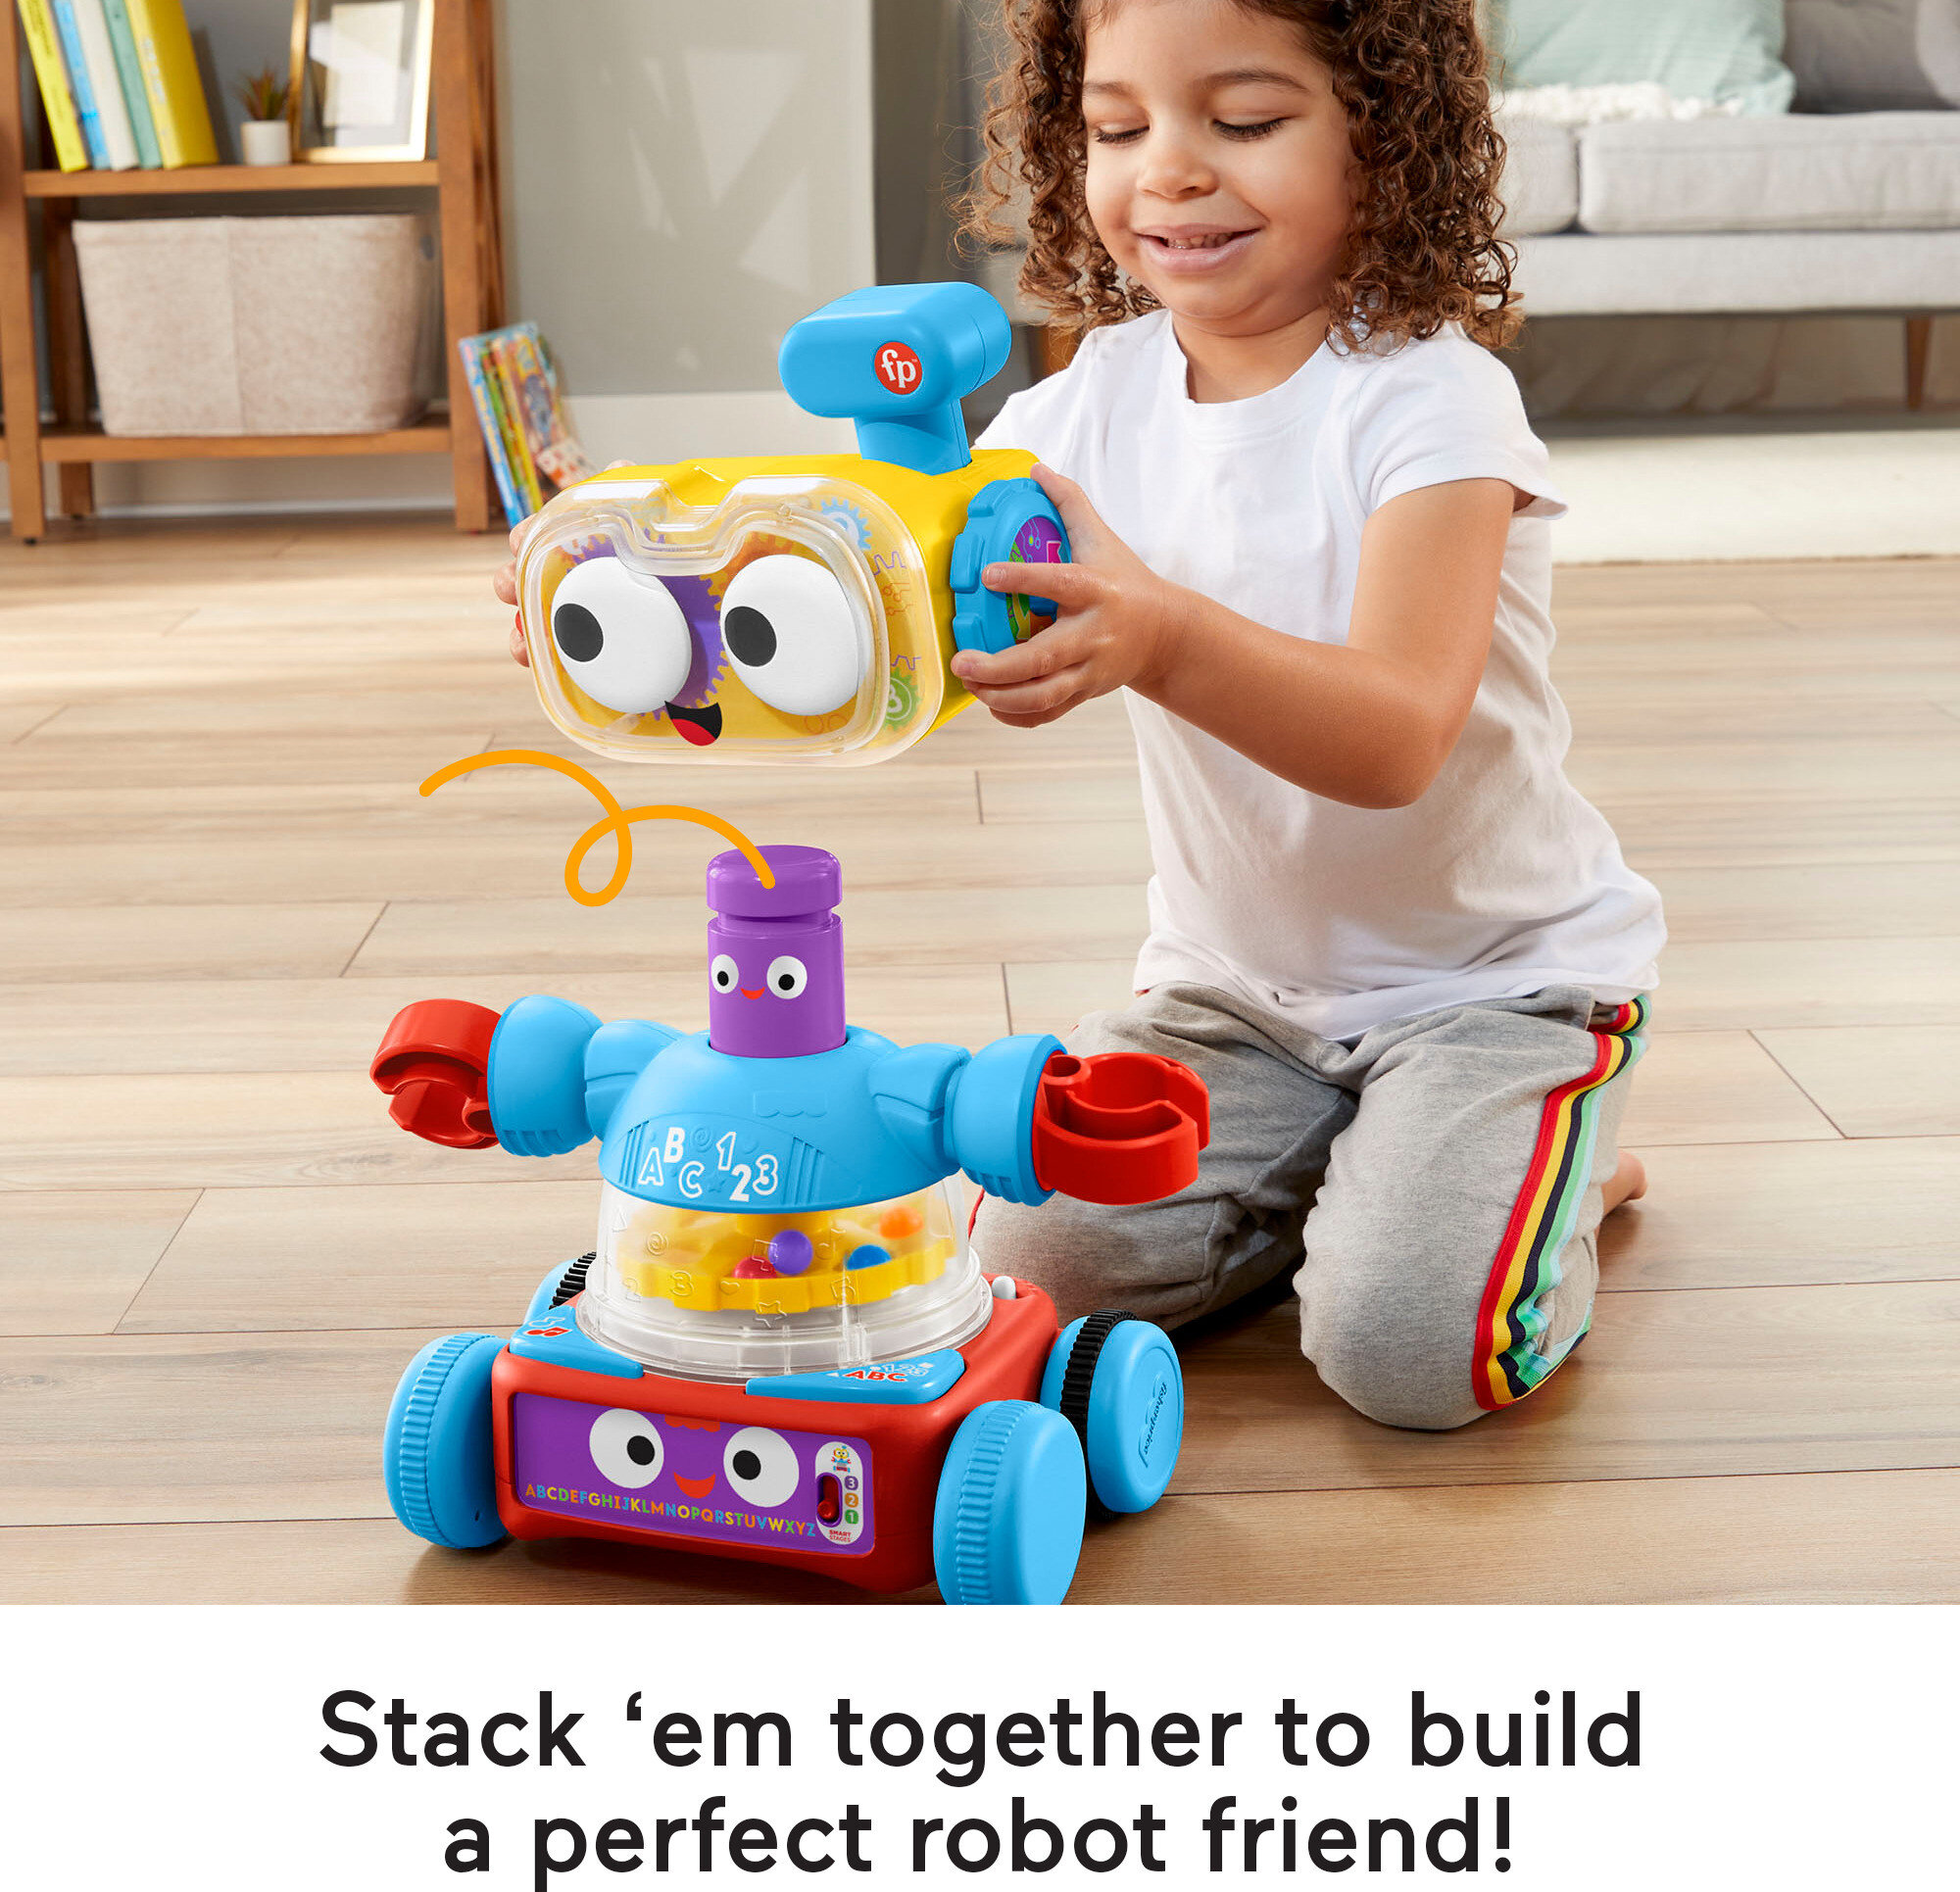 Fisher-Price 4-in-1 Learning Bot Interactive Toy Robot for Infants Toddlers and Preschool Kids - image 5 of 8